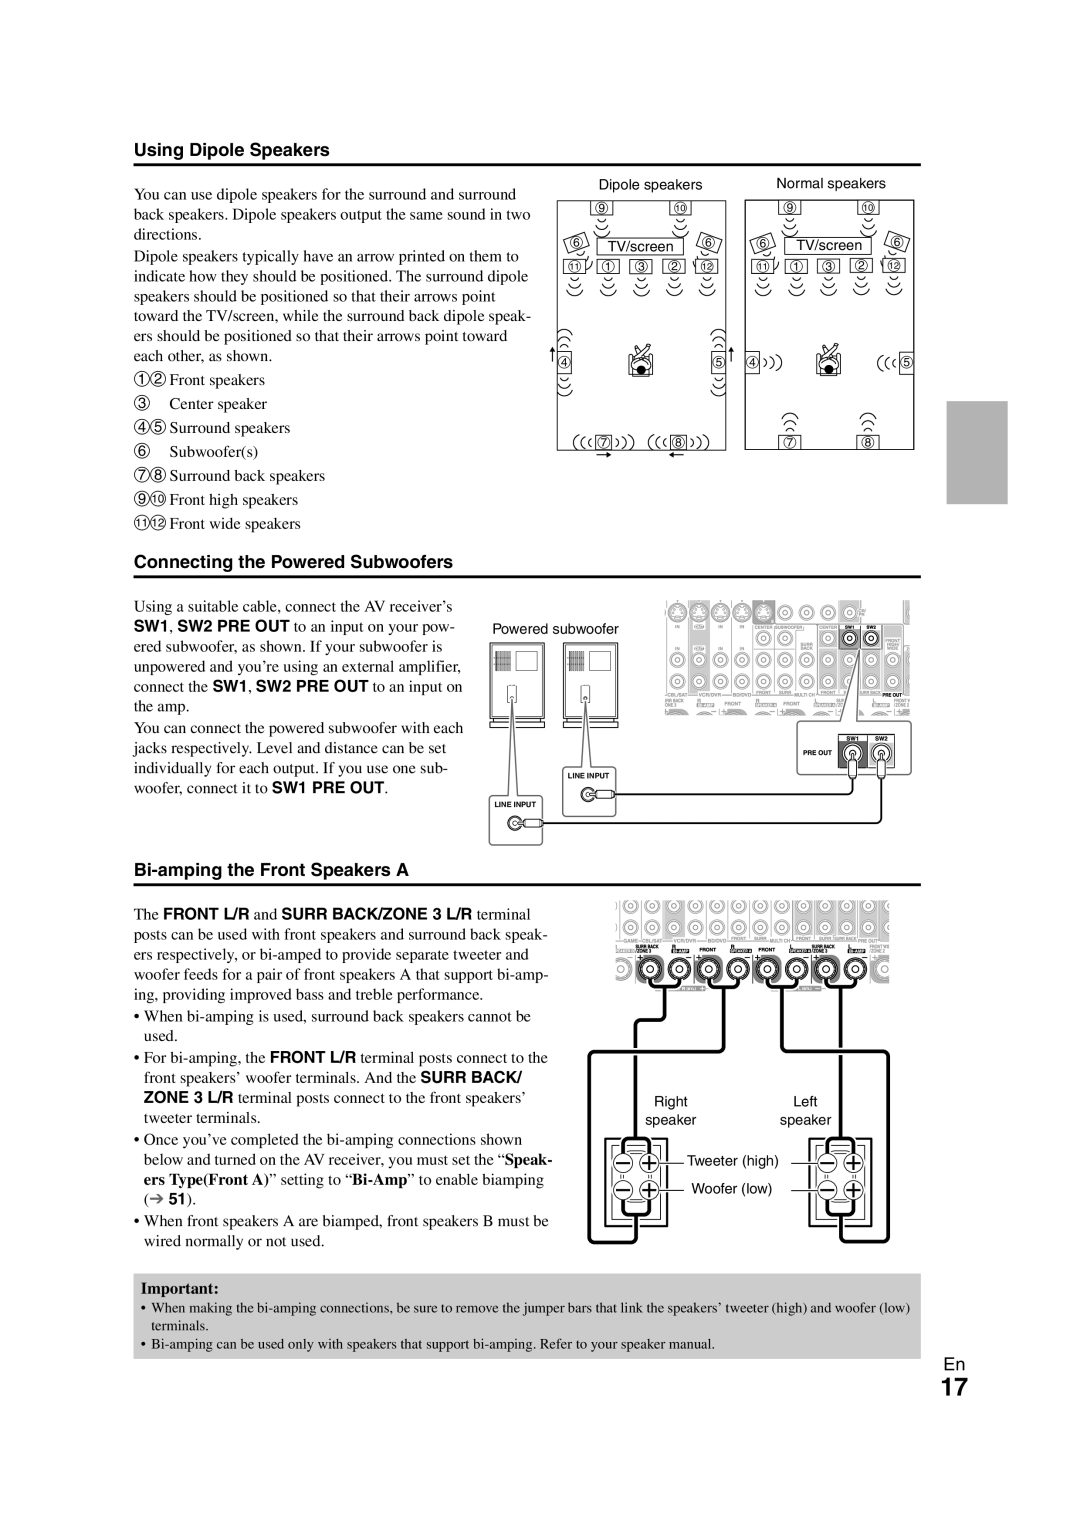 Onkyo TX-NR3008 instruction manual Using Dipole Speakers, Connecting the Powered Subwoofers, Bi-ampingthe Front Speakers A 